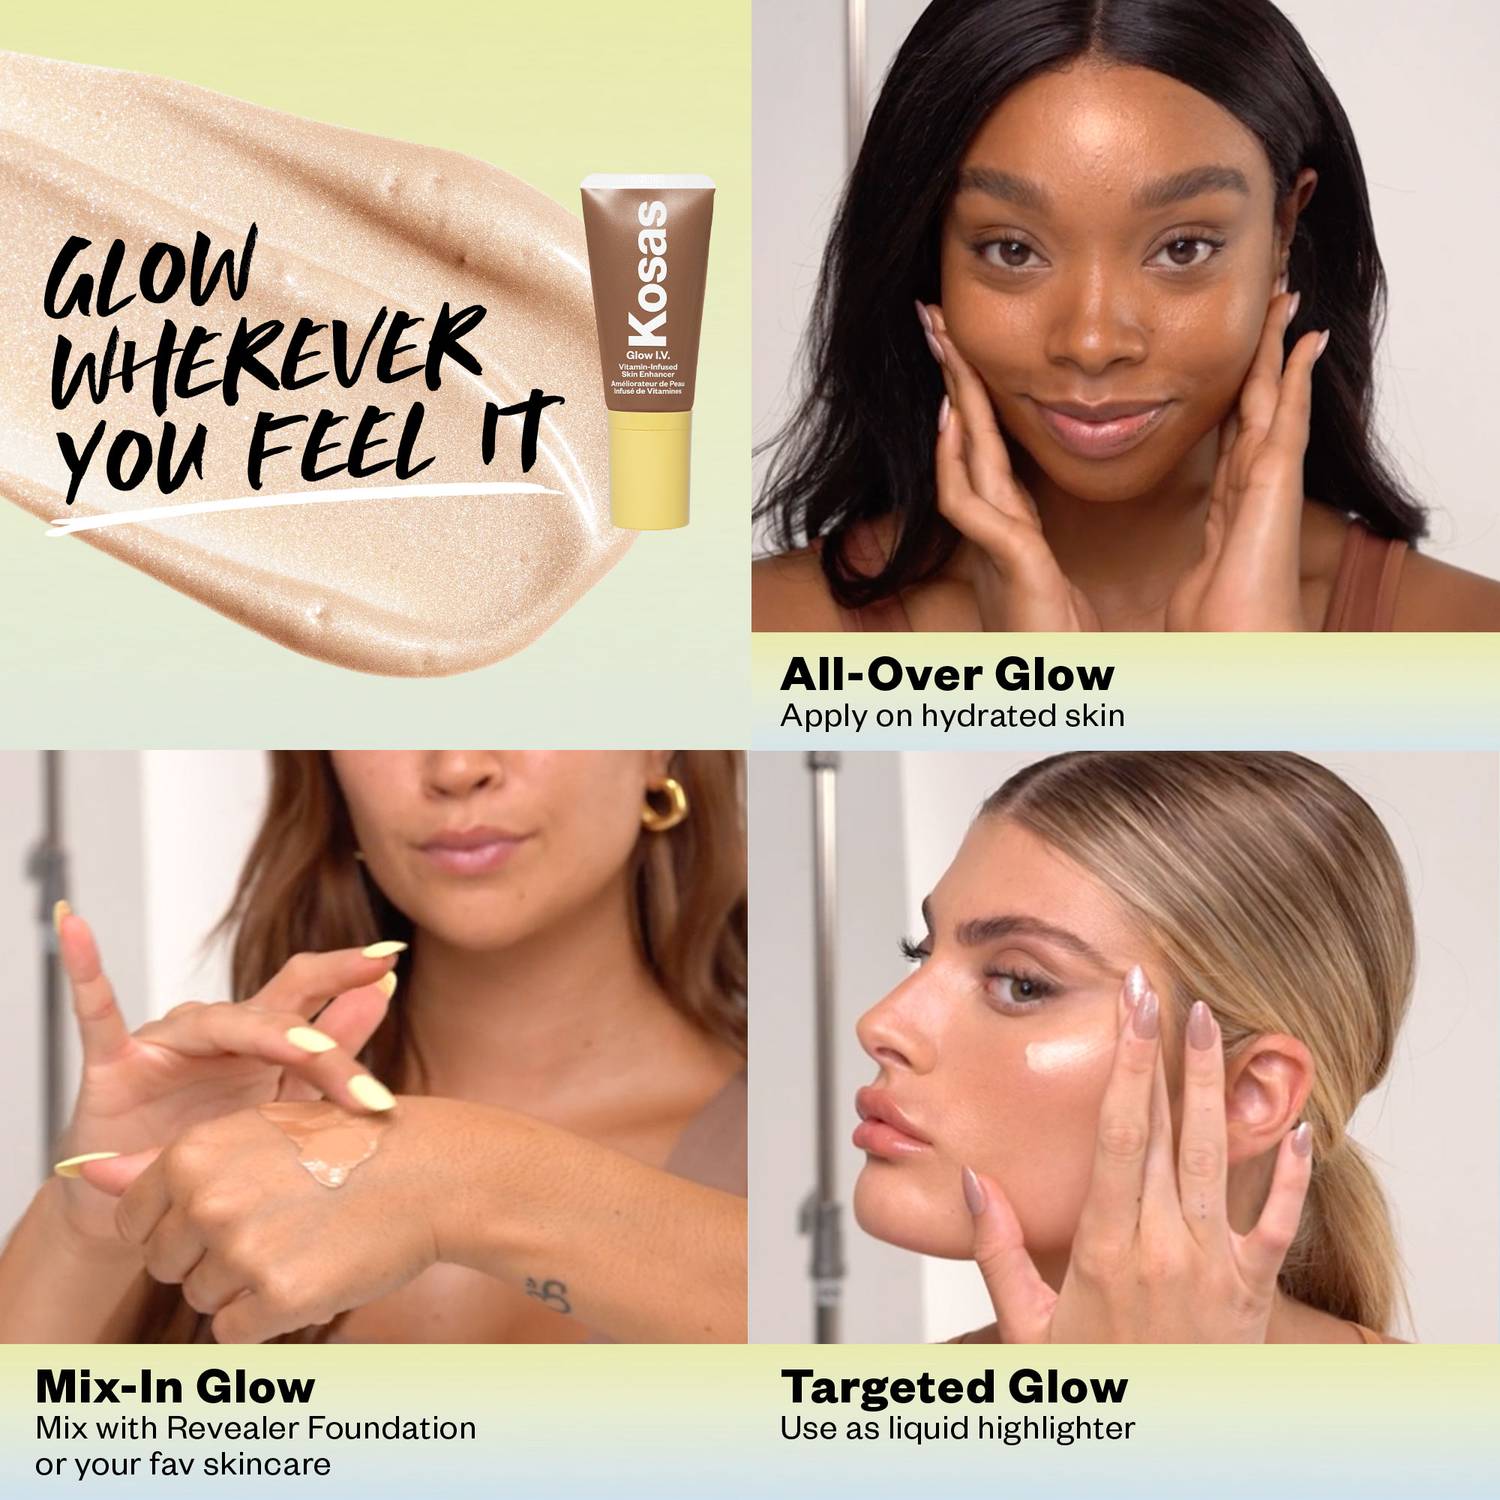 Skin I.V. for All over glow, mix in glow with foundation or targeted glow highlighter